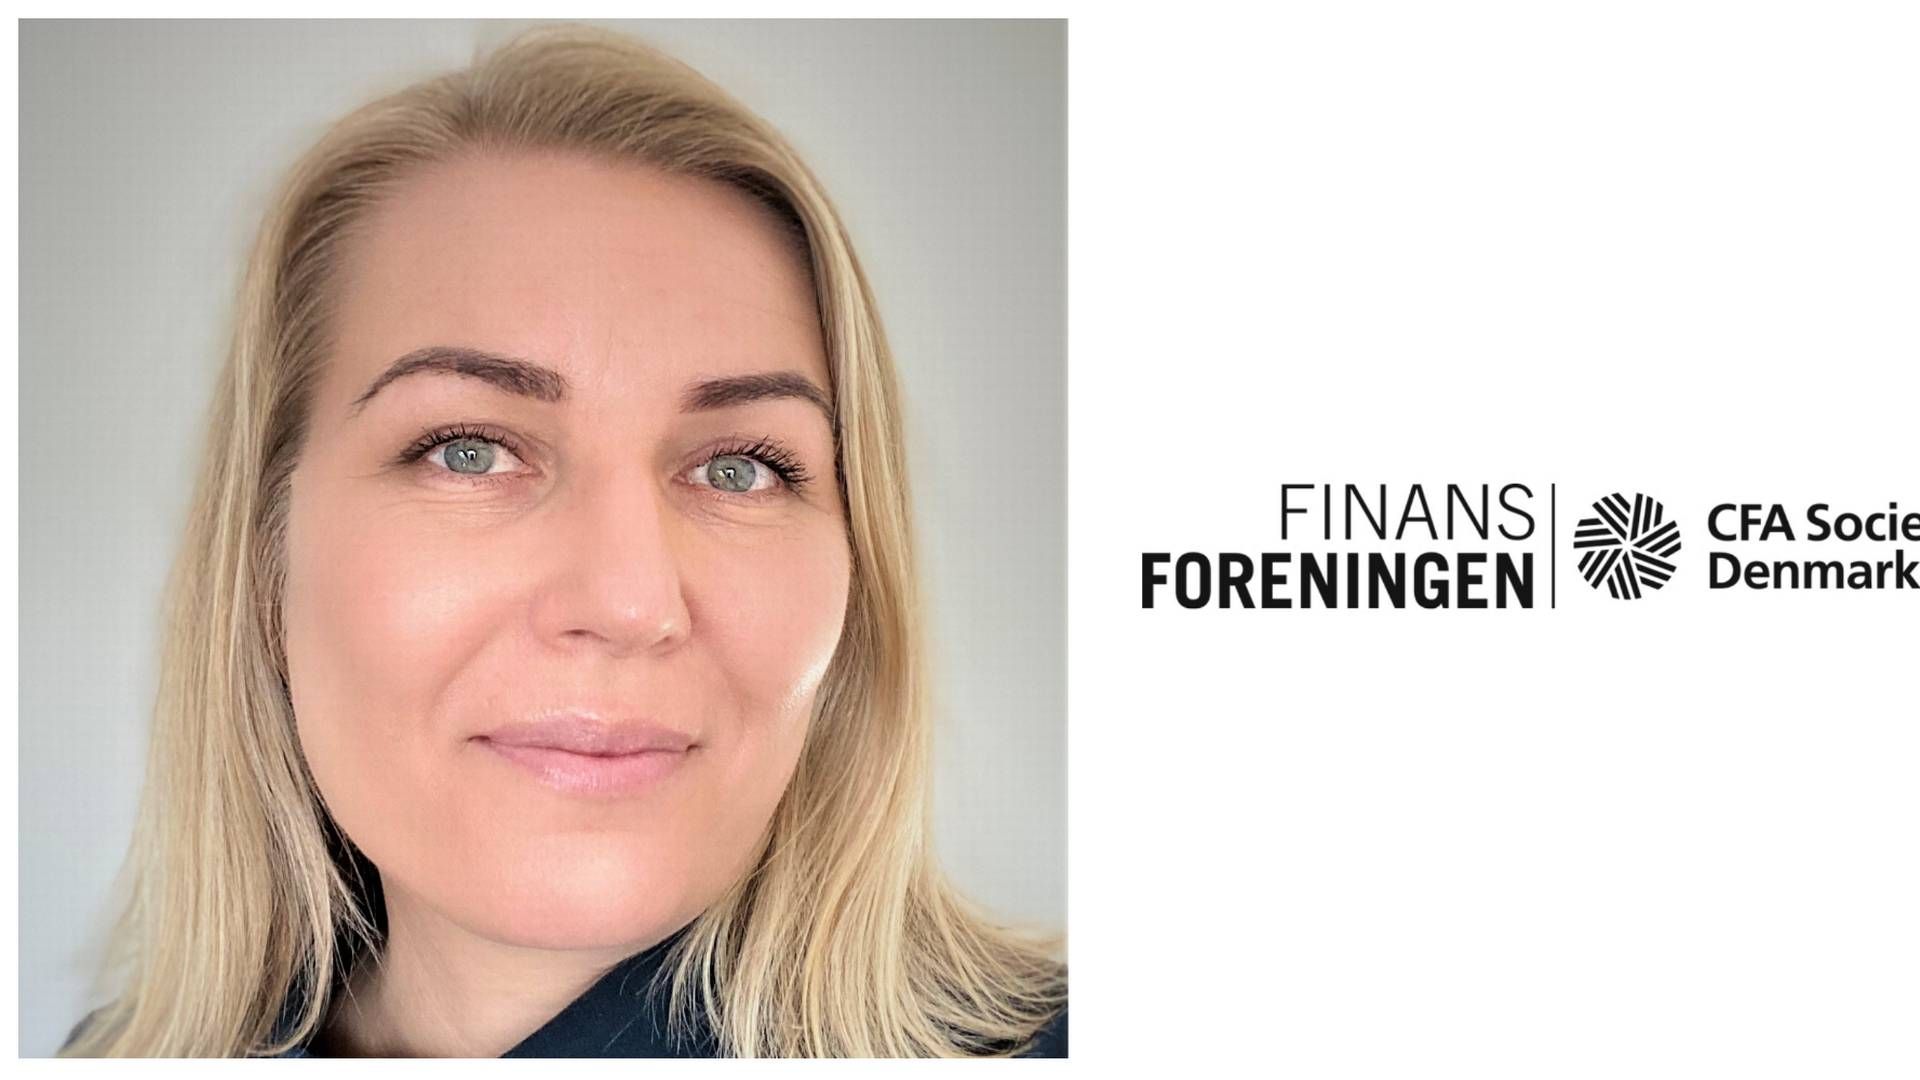 Camilla Jenkey, the co-founder of the new diversity network of Danish CFA Society and Chief Communication Consultant at Danske Invest.